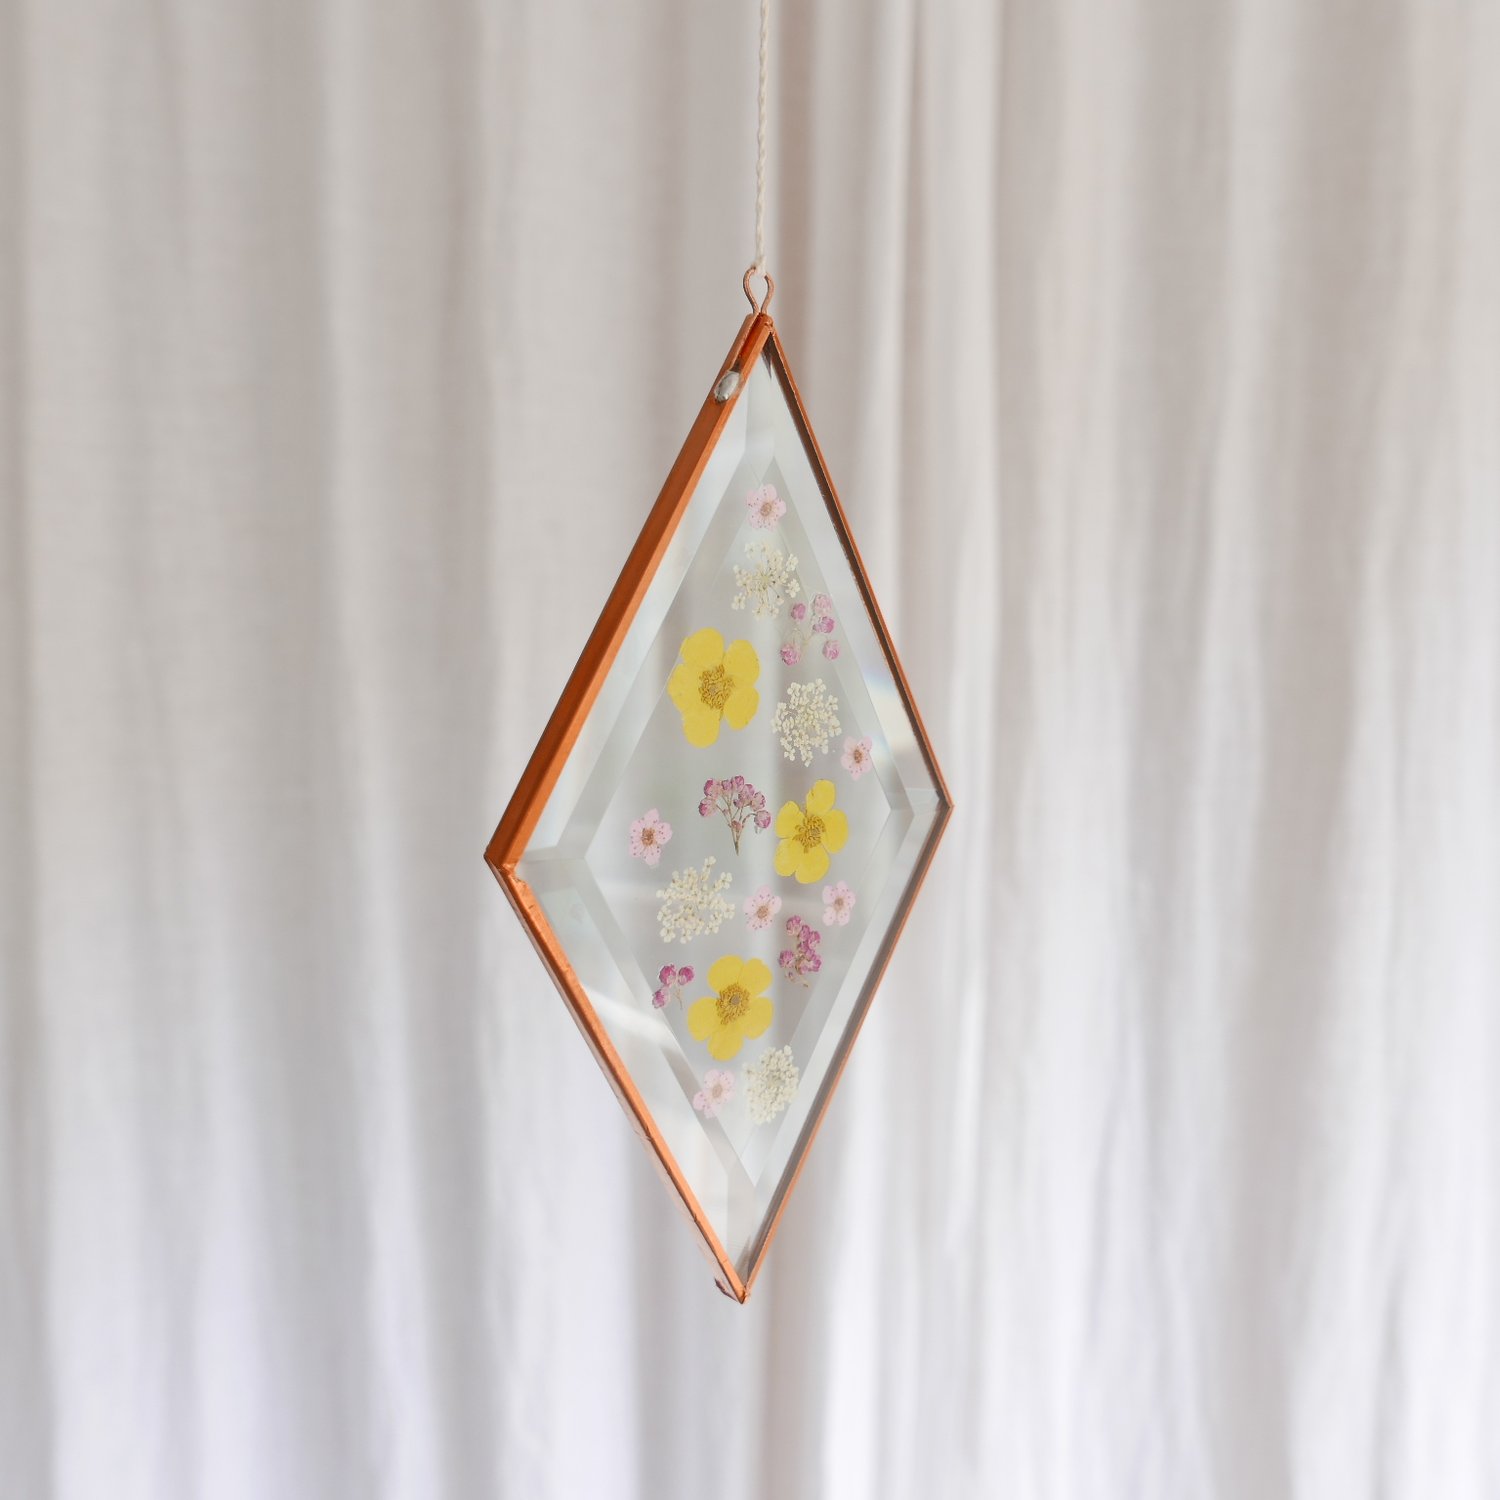 Image of Pressed Flower Suncatcher - Buttercup and Queen Anne's Lace